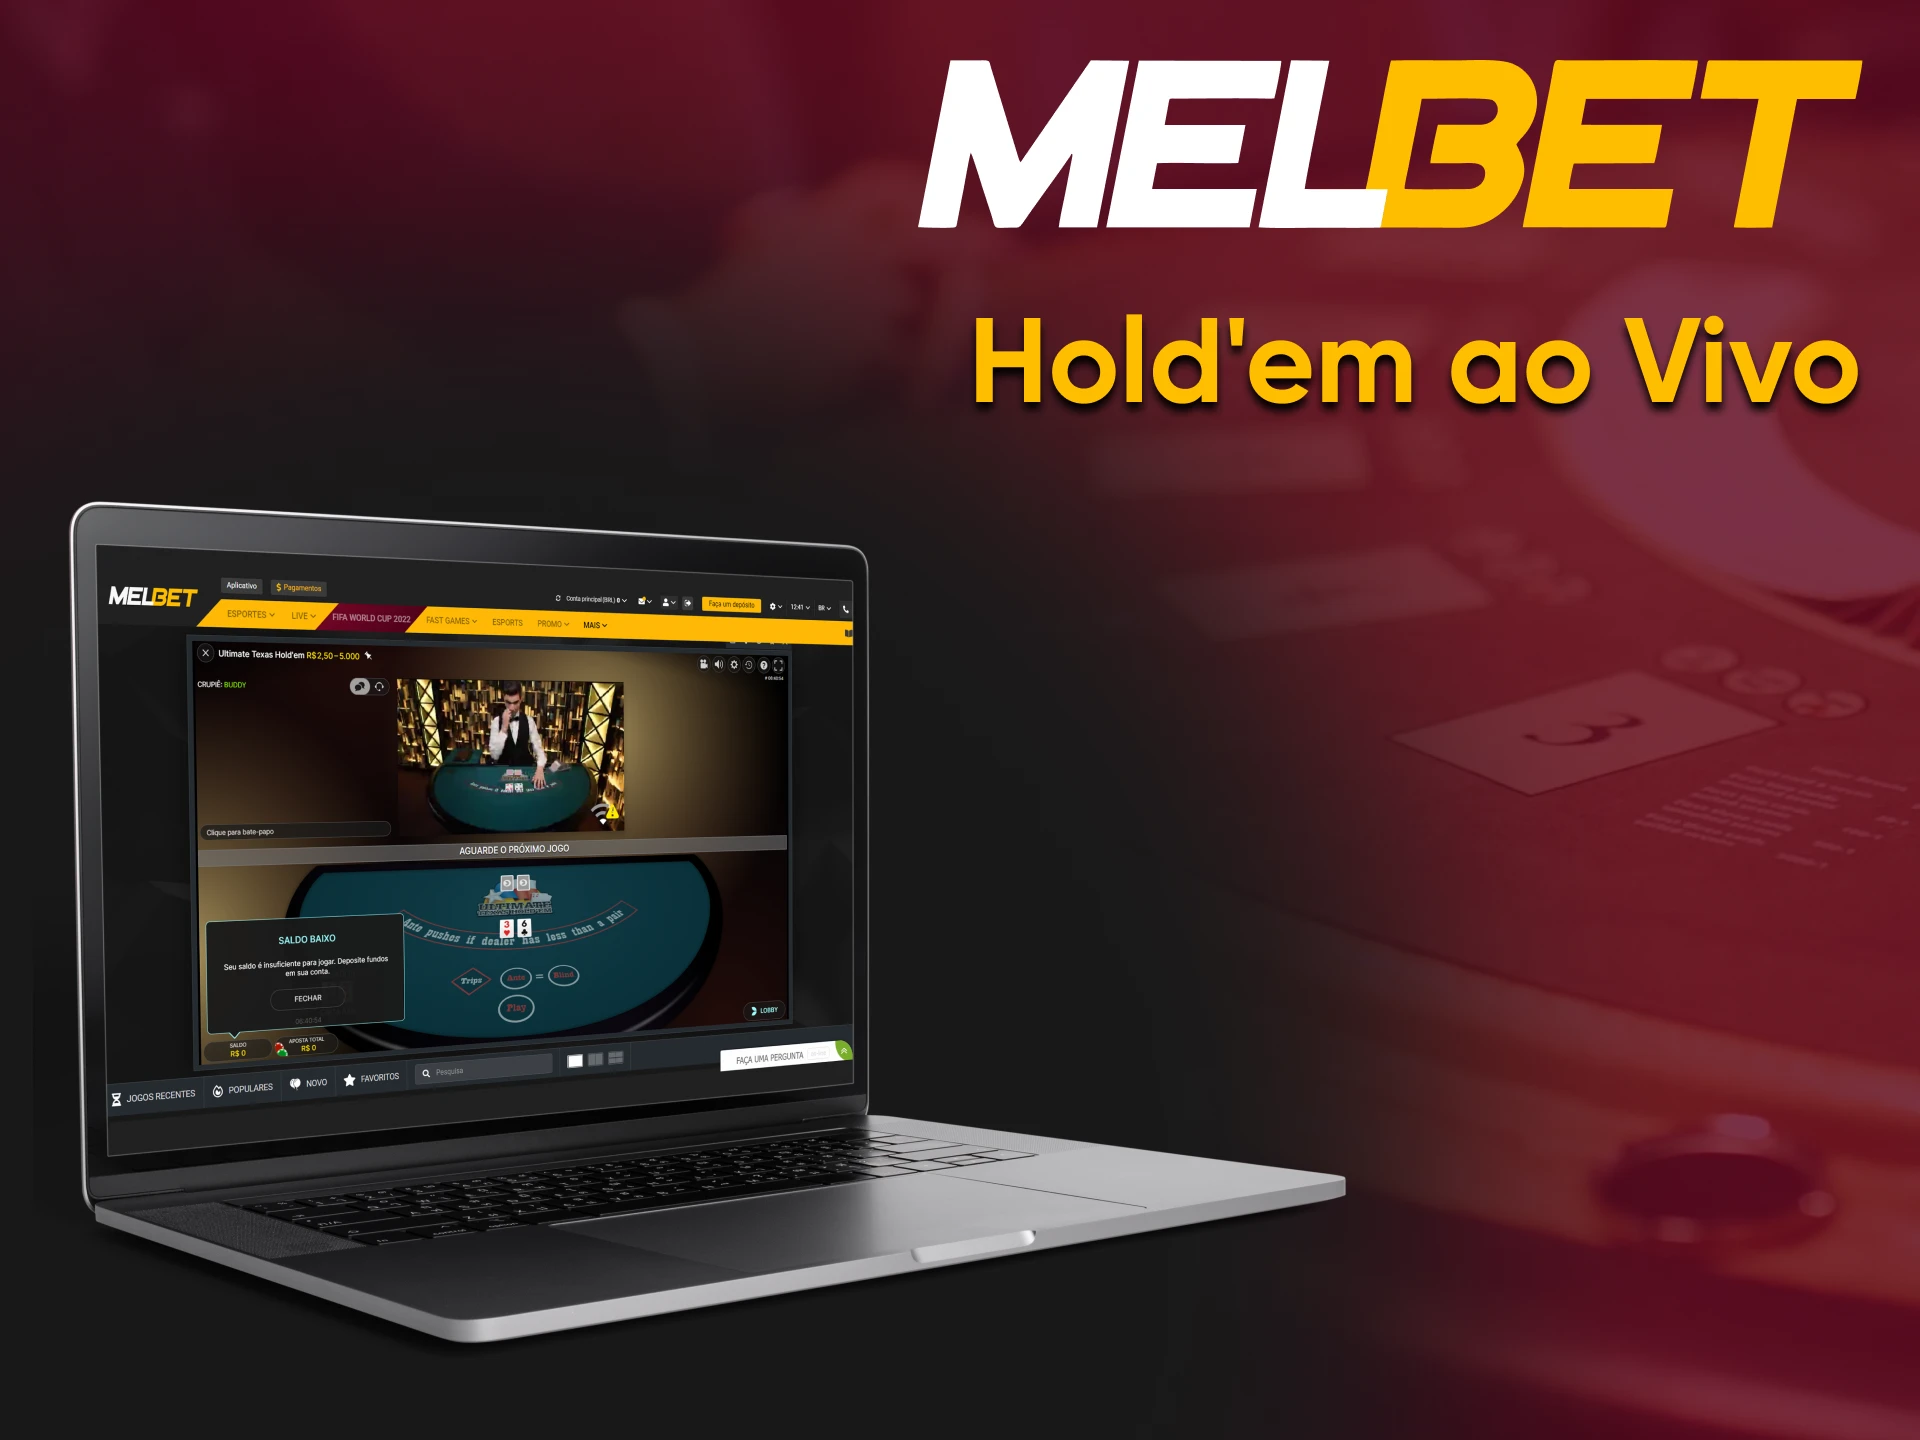 To play Live Melbet Hold'em, go to the section you need.